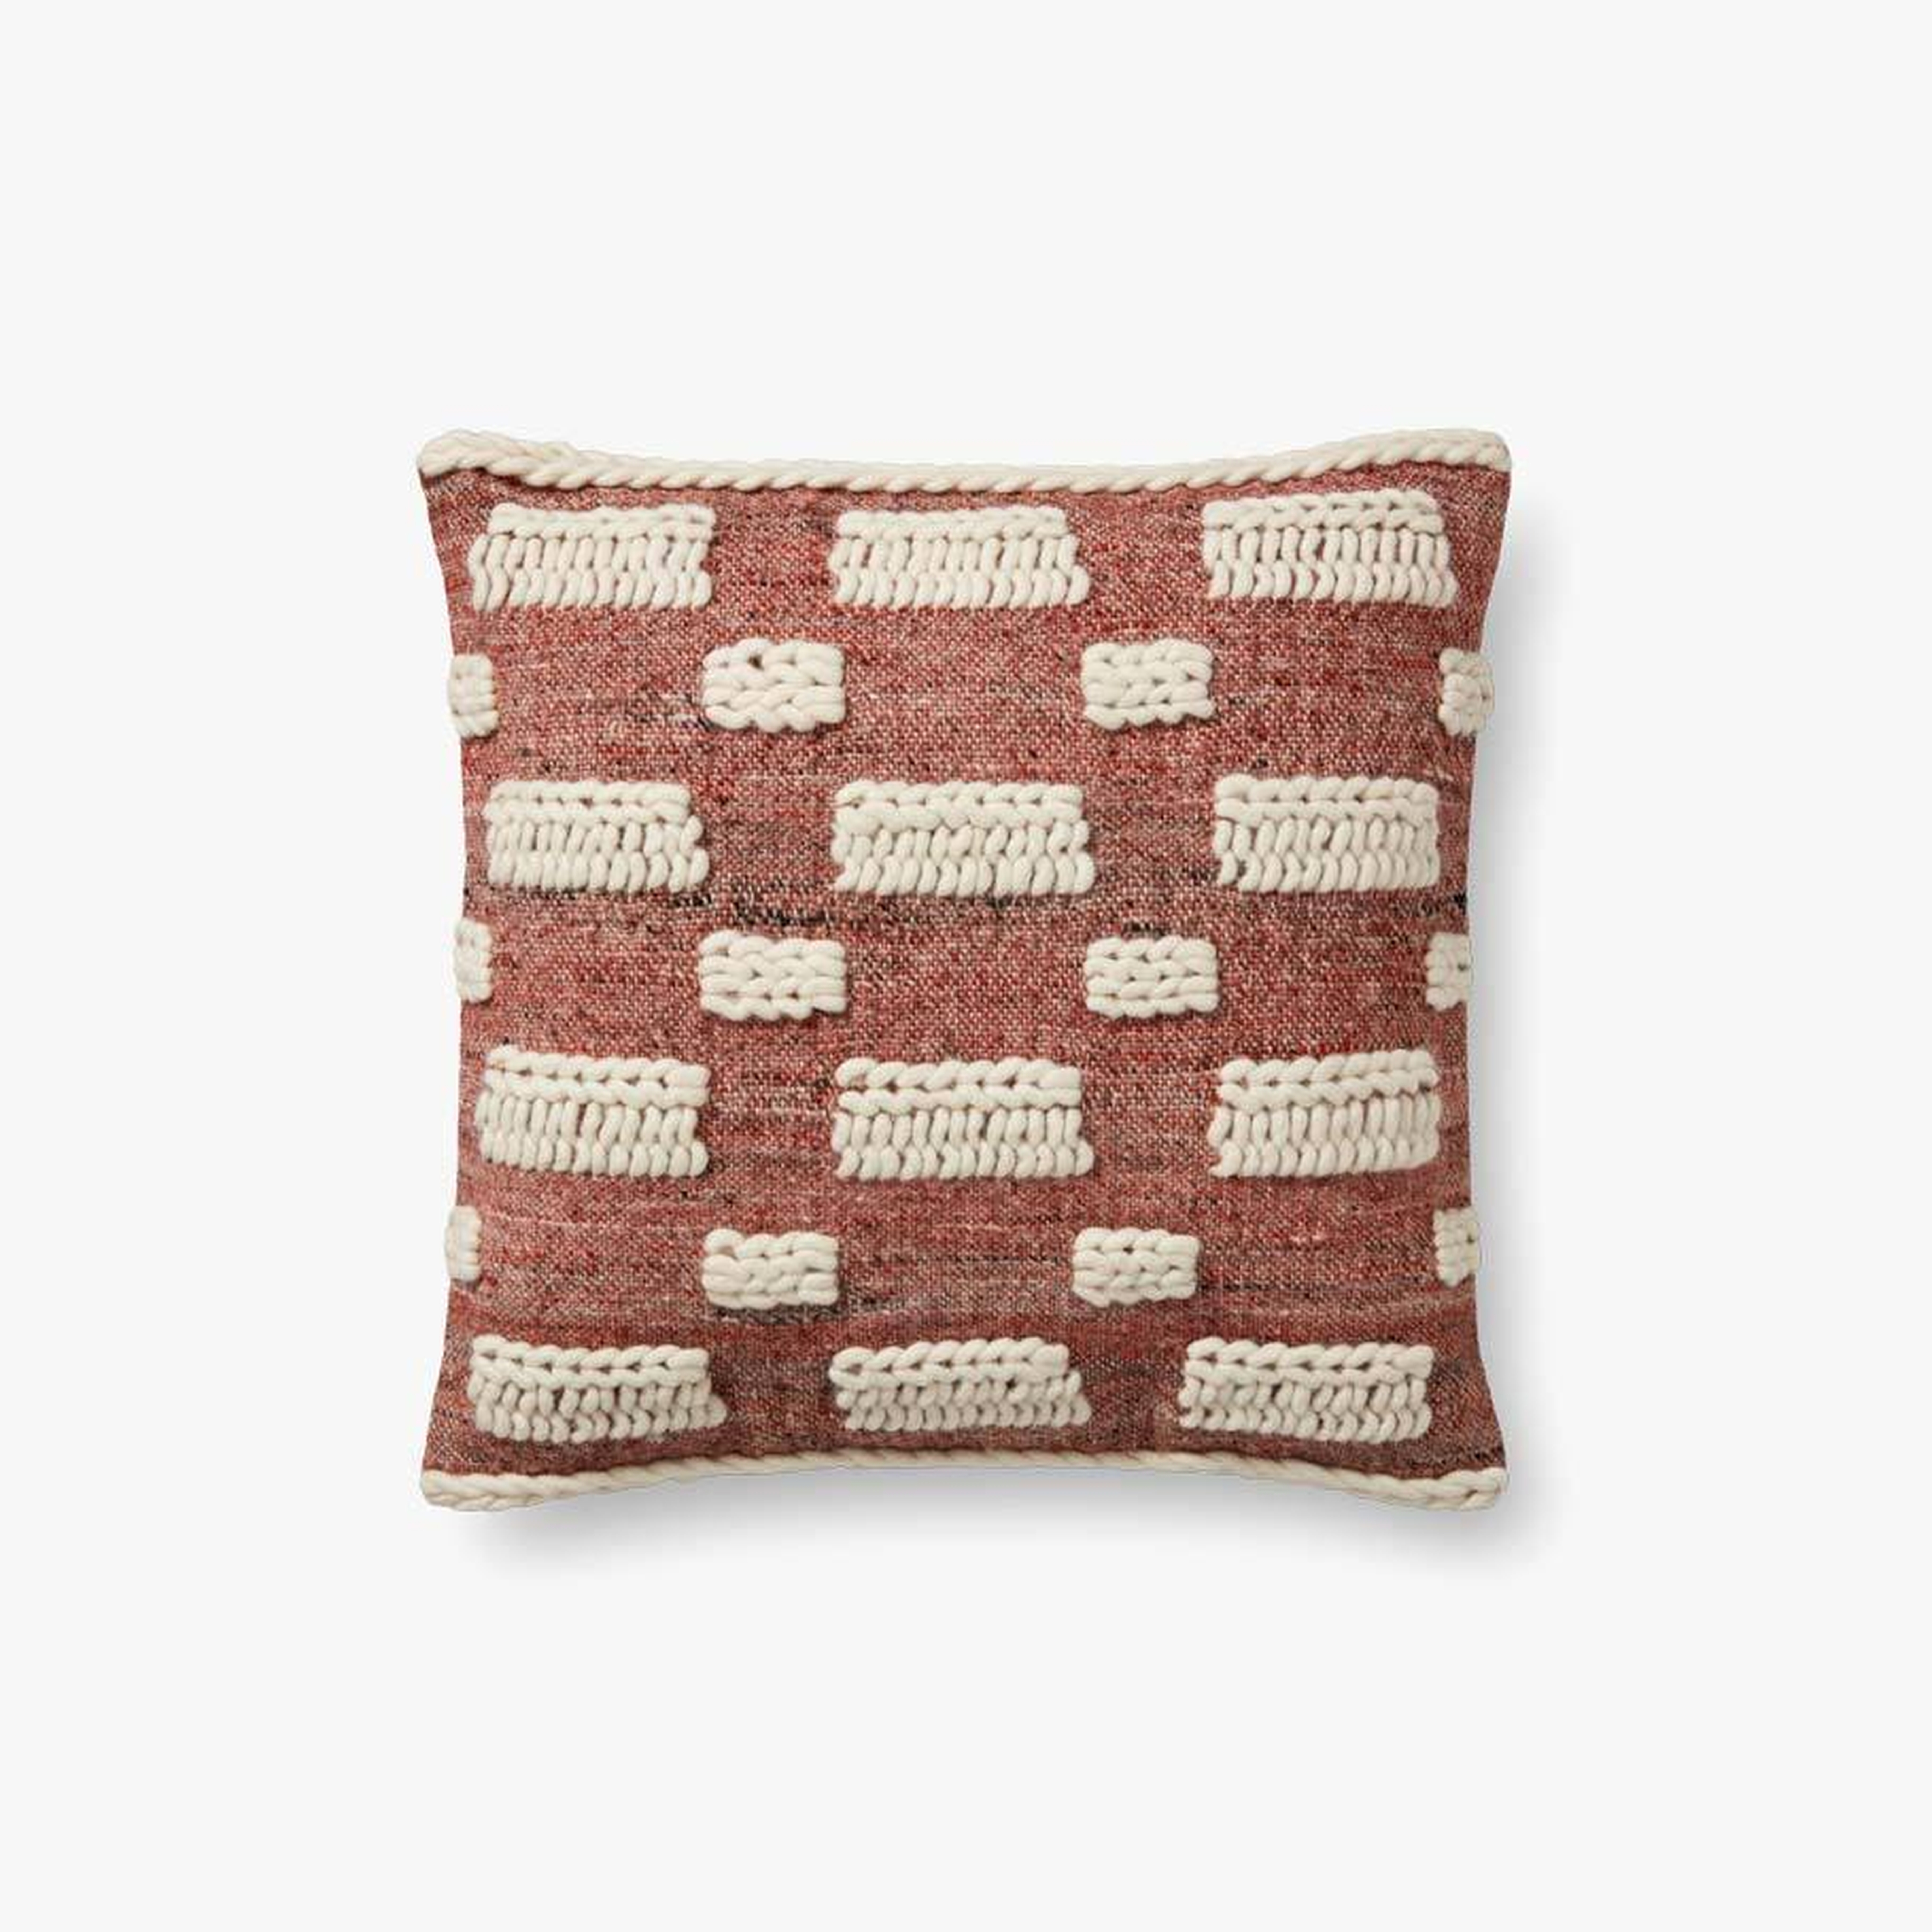 Woven Checkered Throw Pillow, Rust & Ivory, 18" x 18" - ED Ellen DeGeneres Crafted by Loloi Rugs